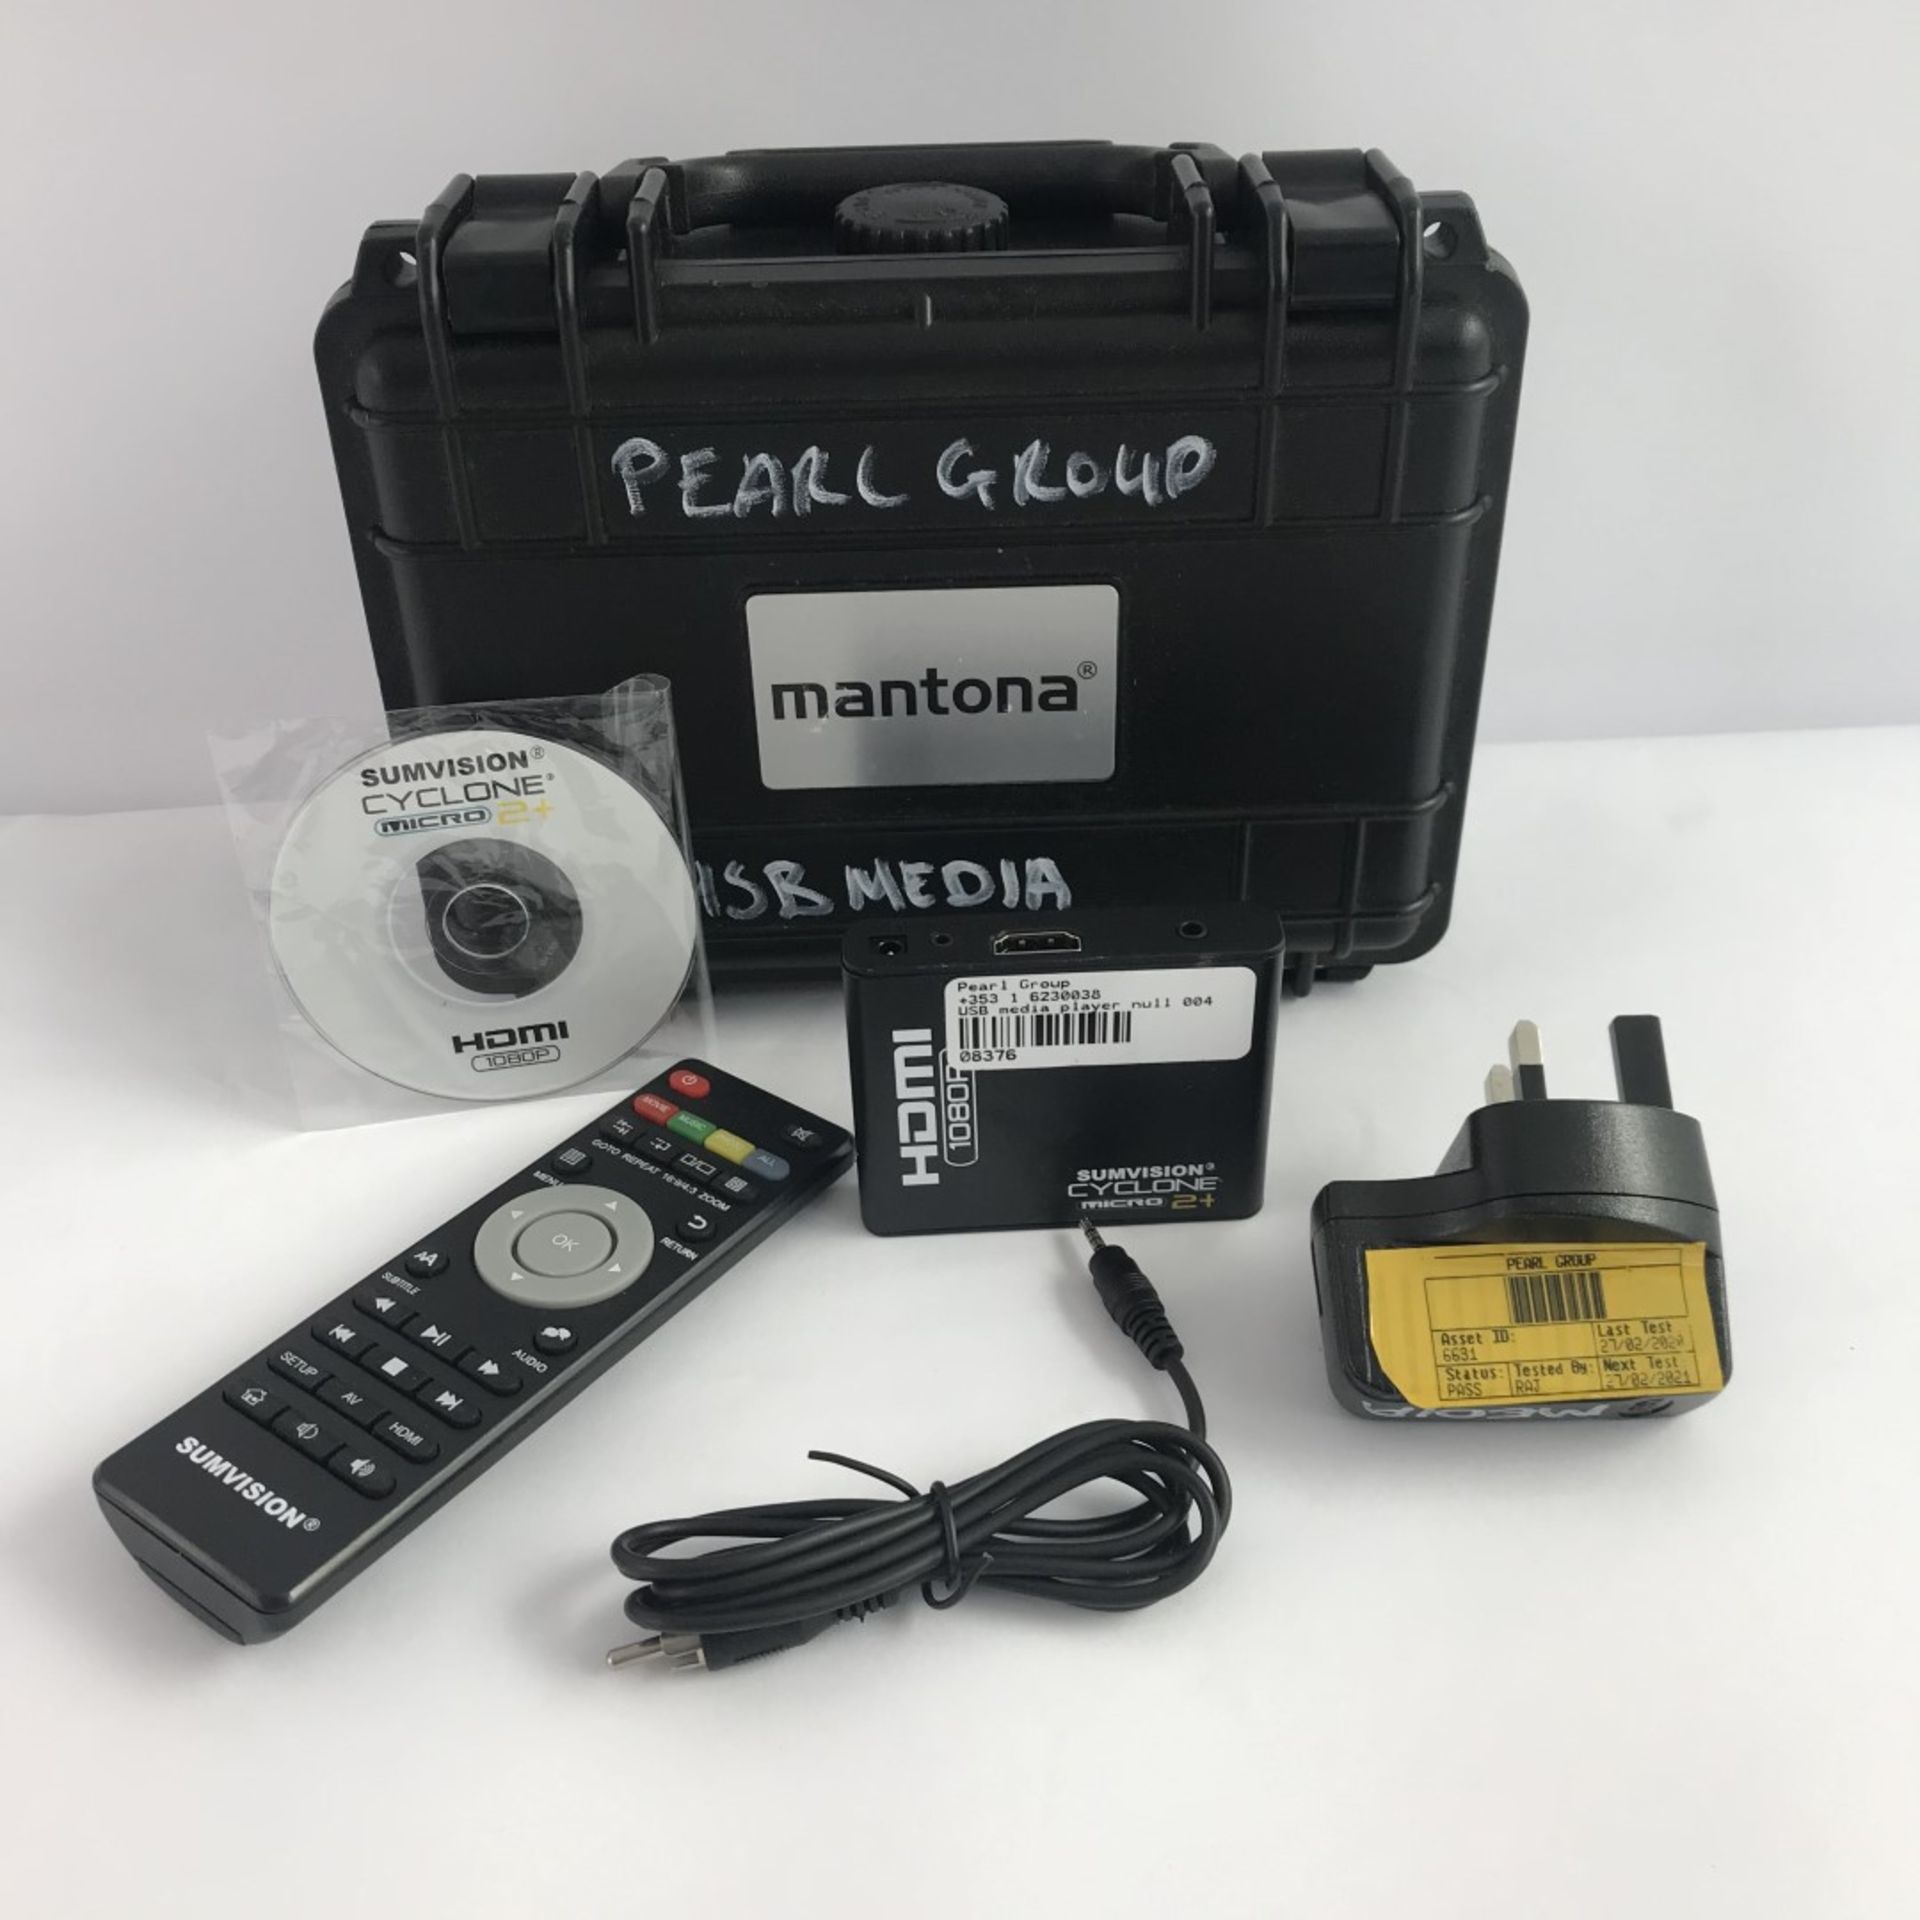 1 x Sumvision USB Media Player In Case - Ref: 81 - CL581 - Location: Altrincham WA14Items will be